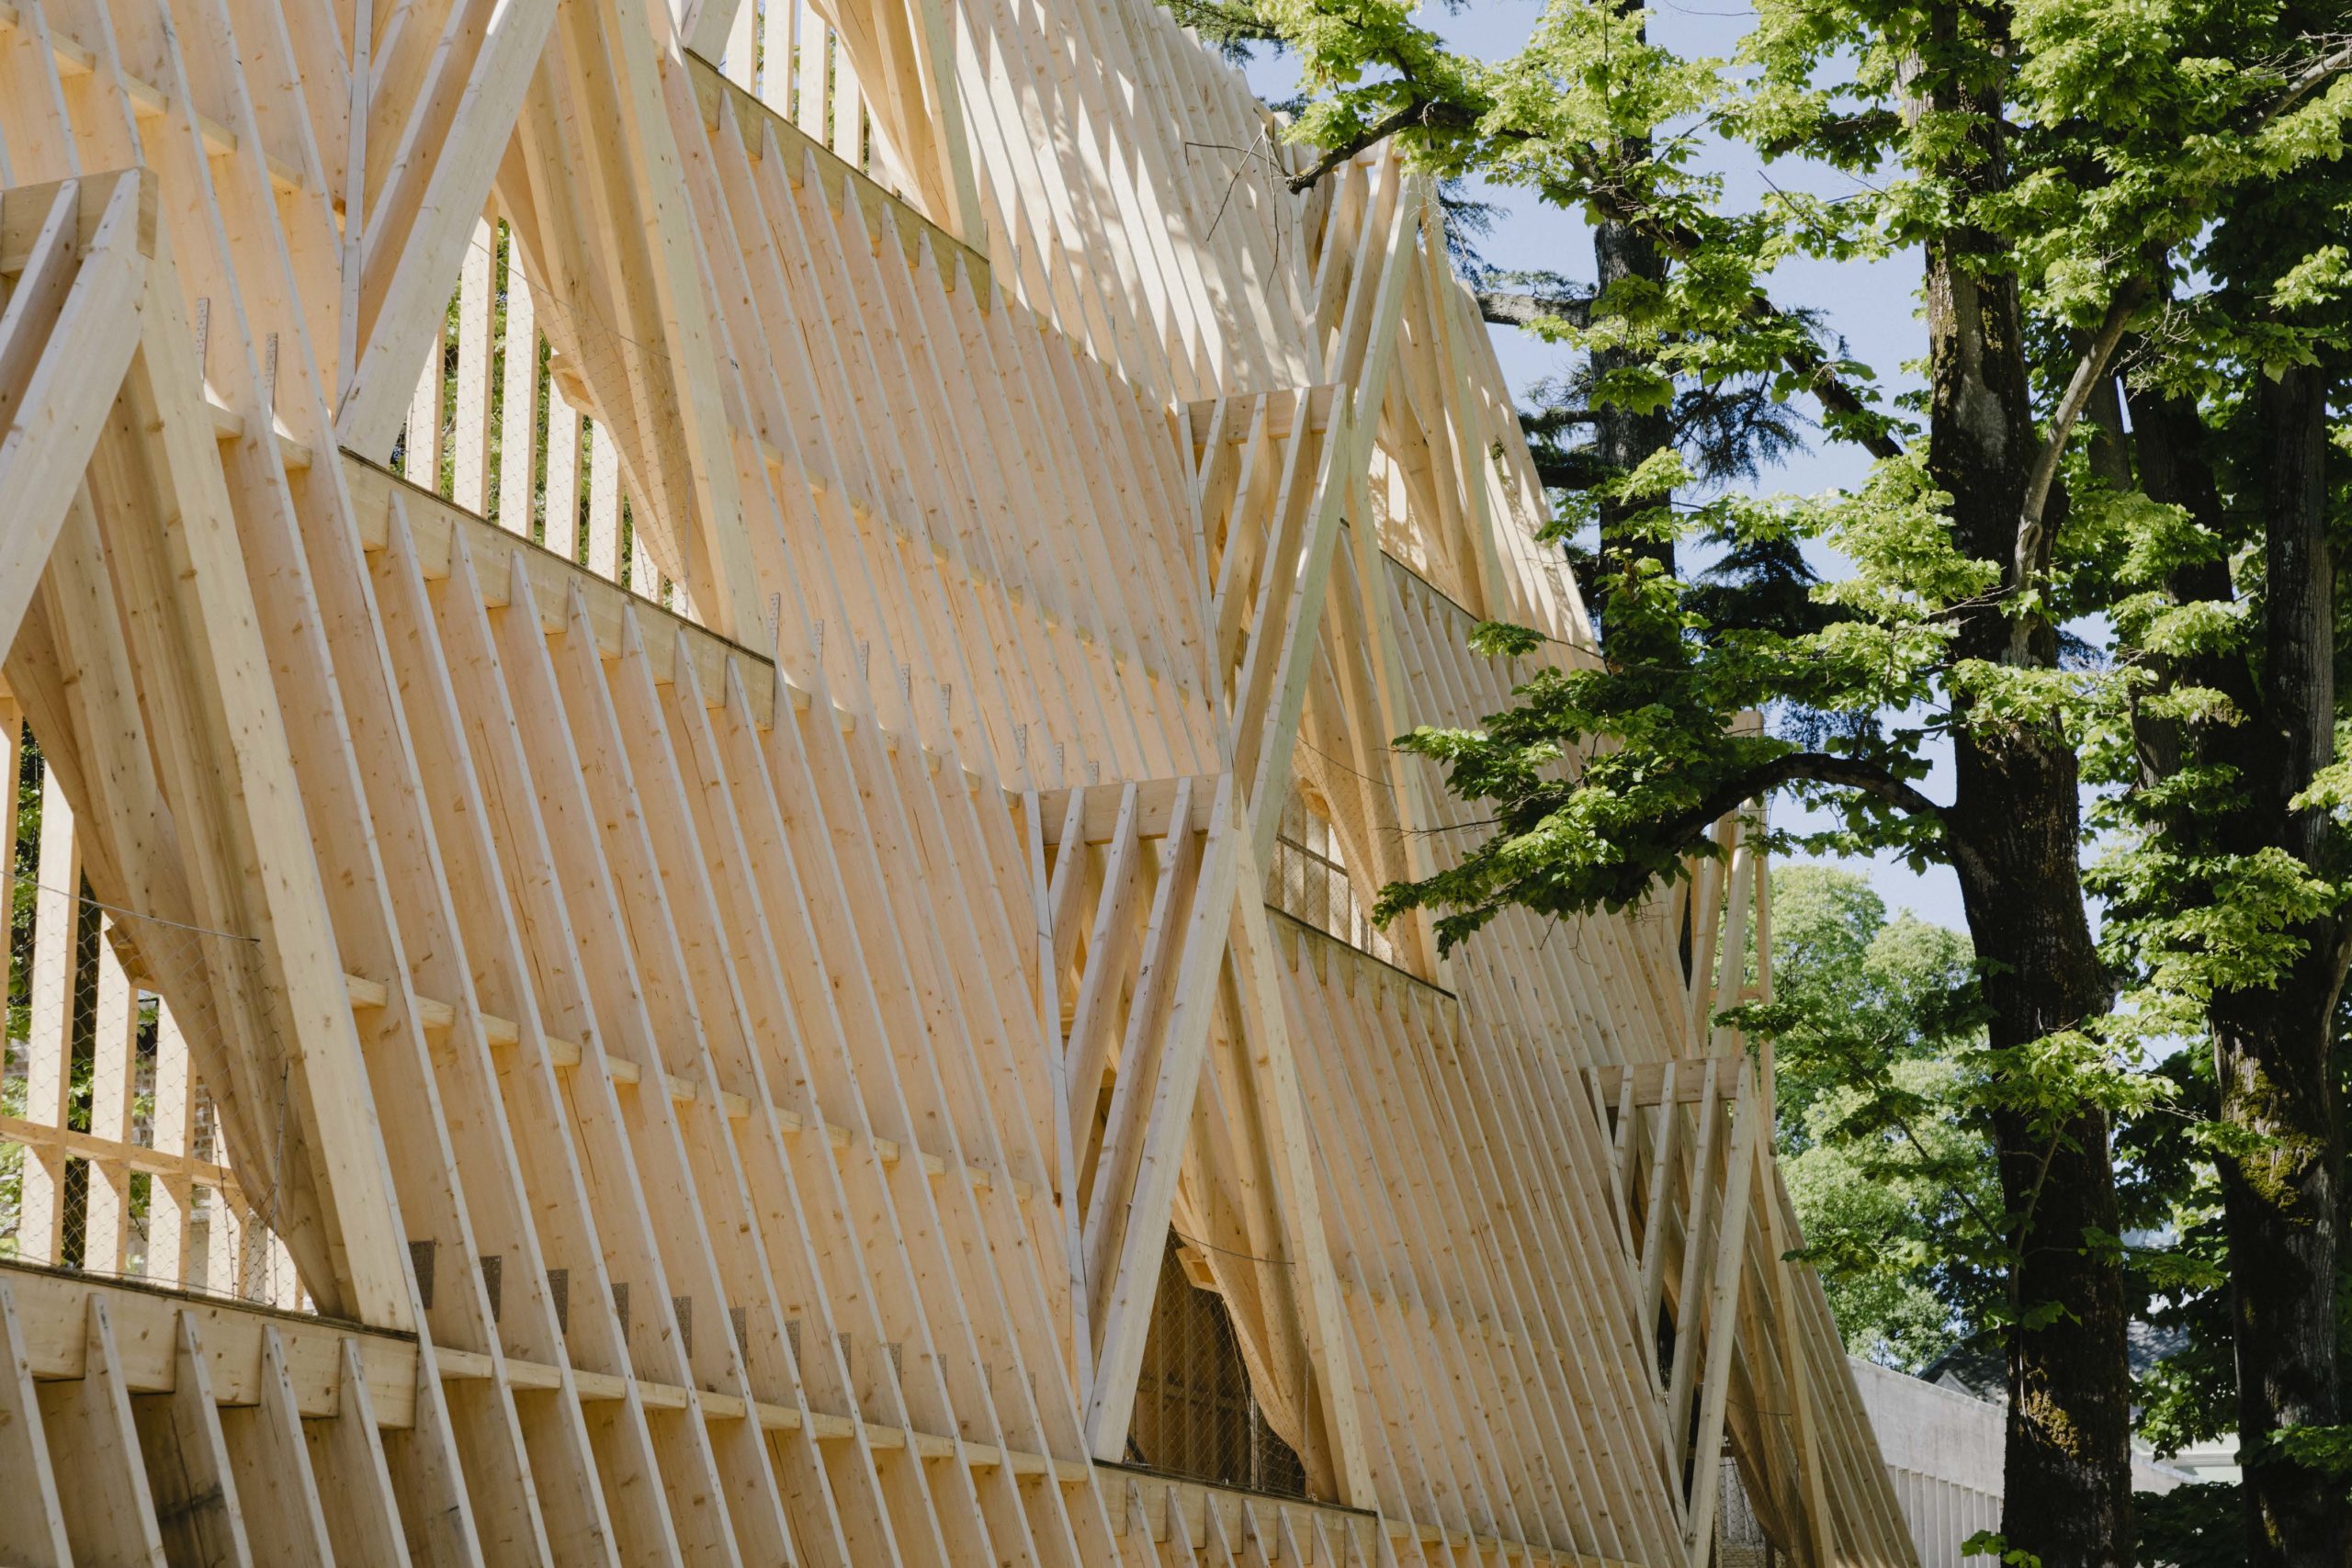 Peaked roof structure made of 2 by 4 wood with trees next to it